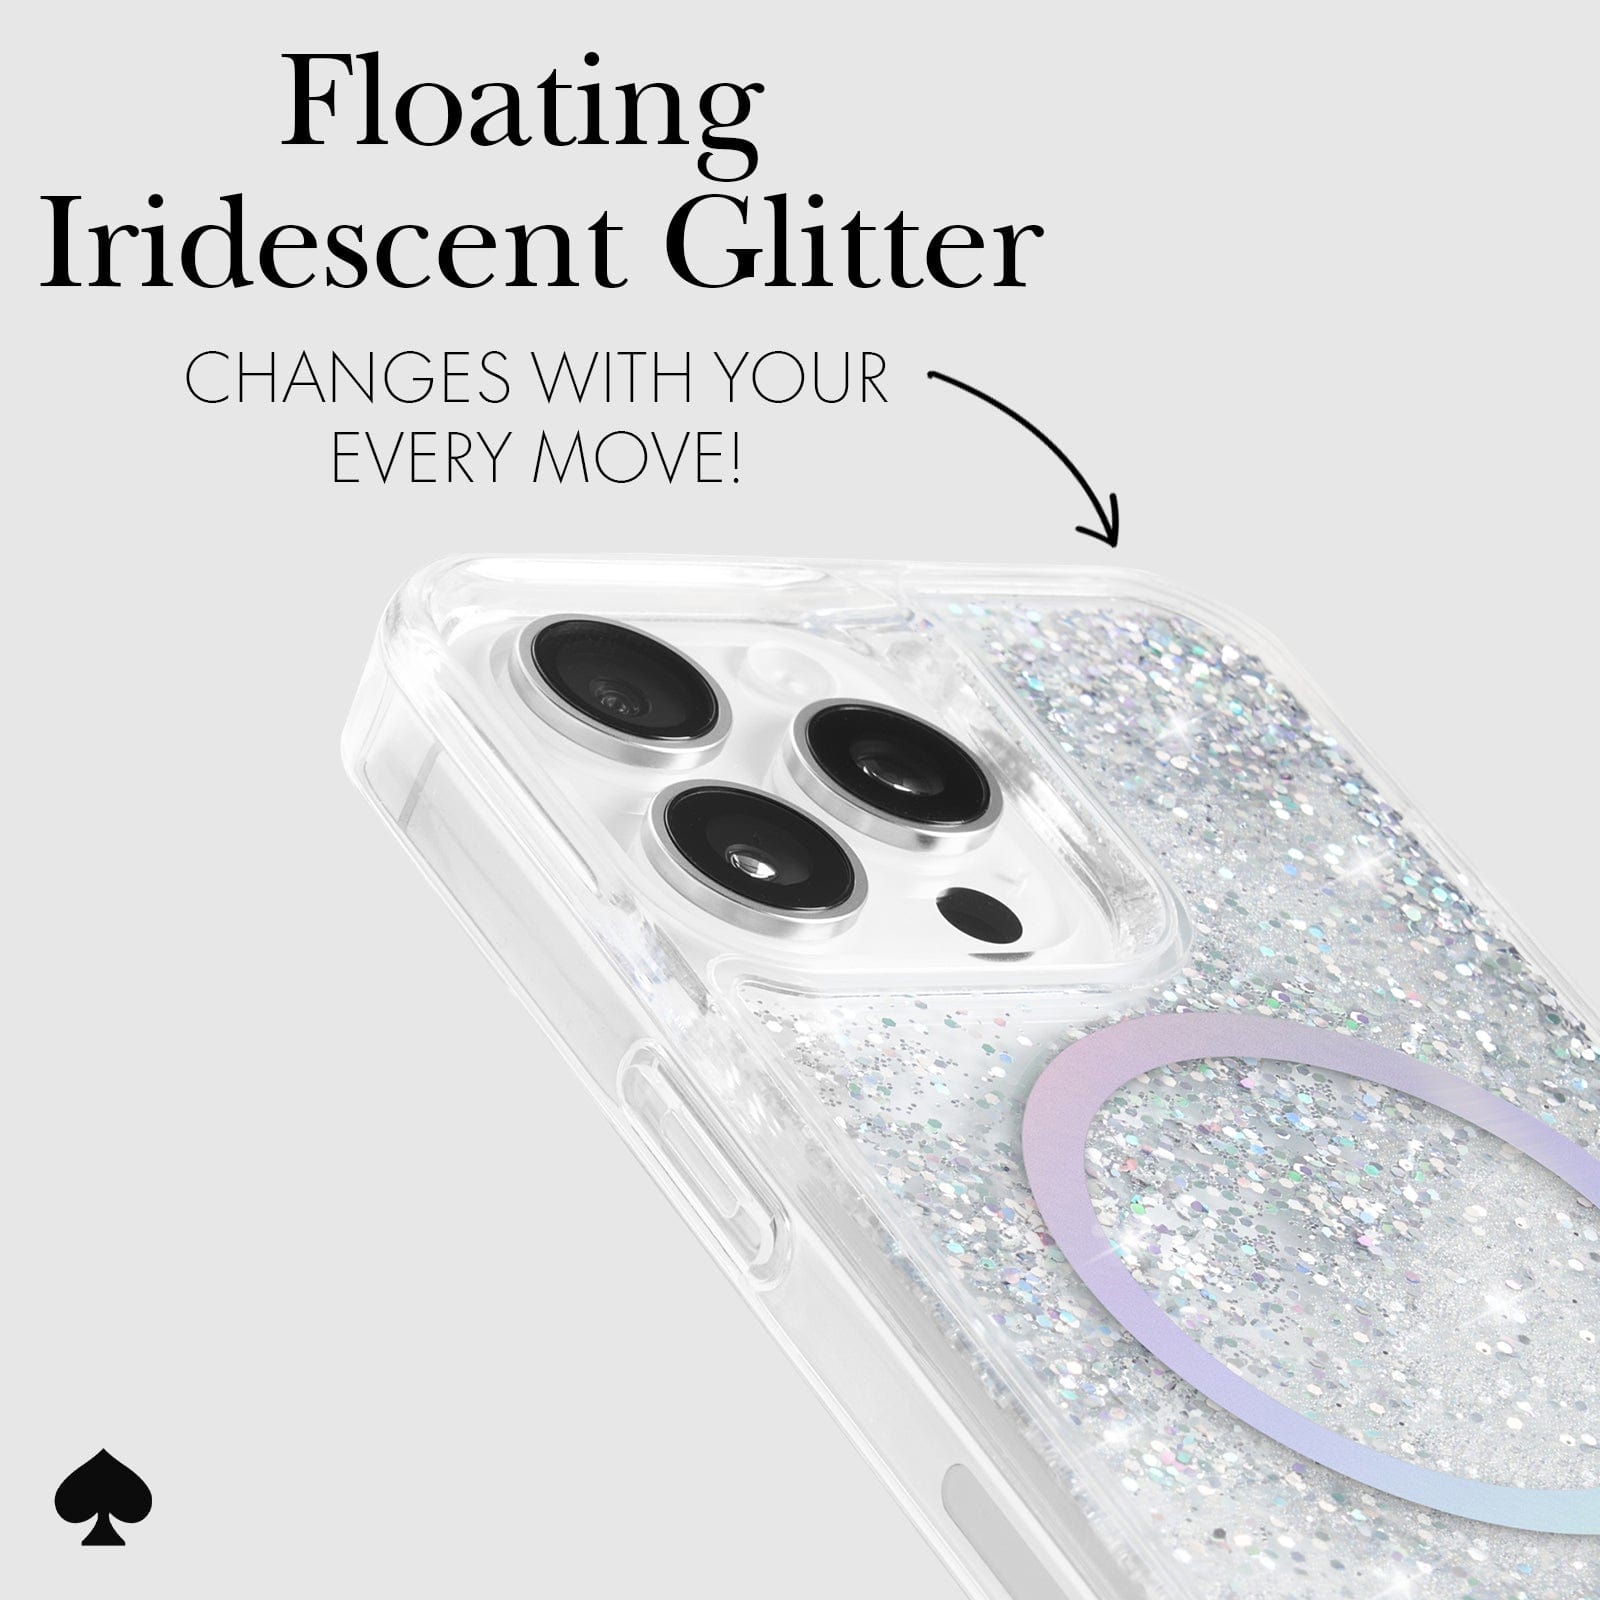 FLOATING IRIDESCENT GLITTER. CHANGES WITH YOUR EVERY MOVE